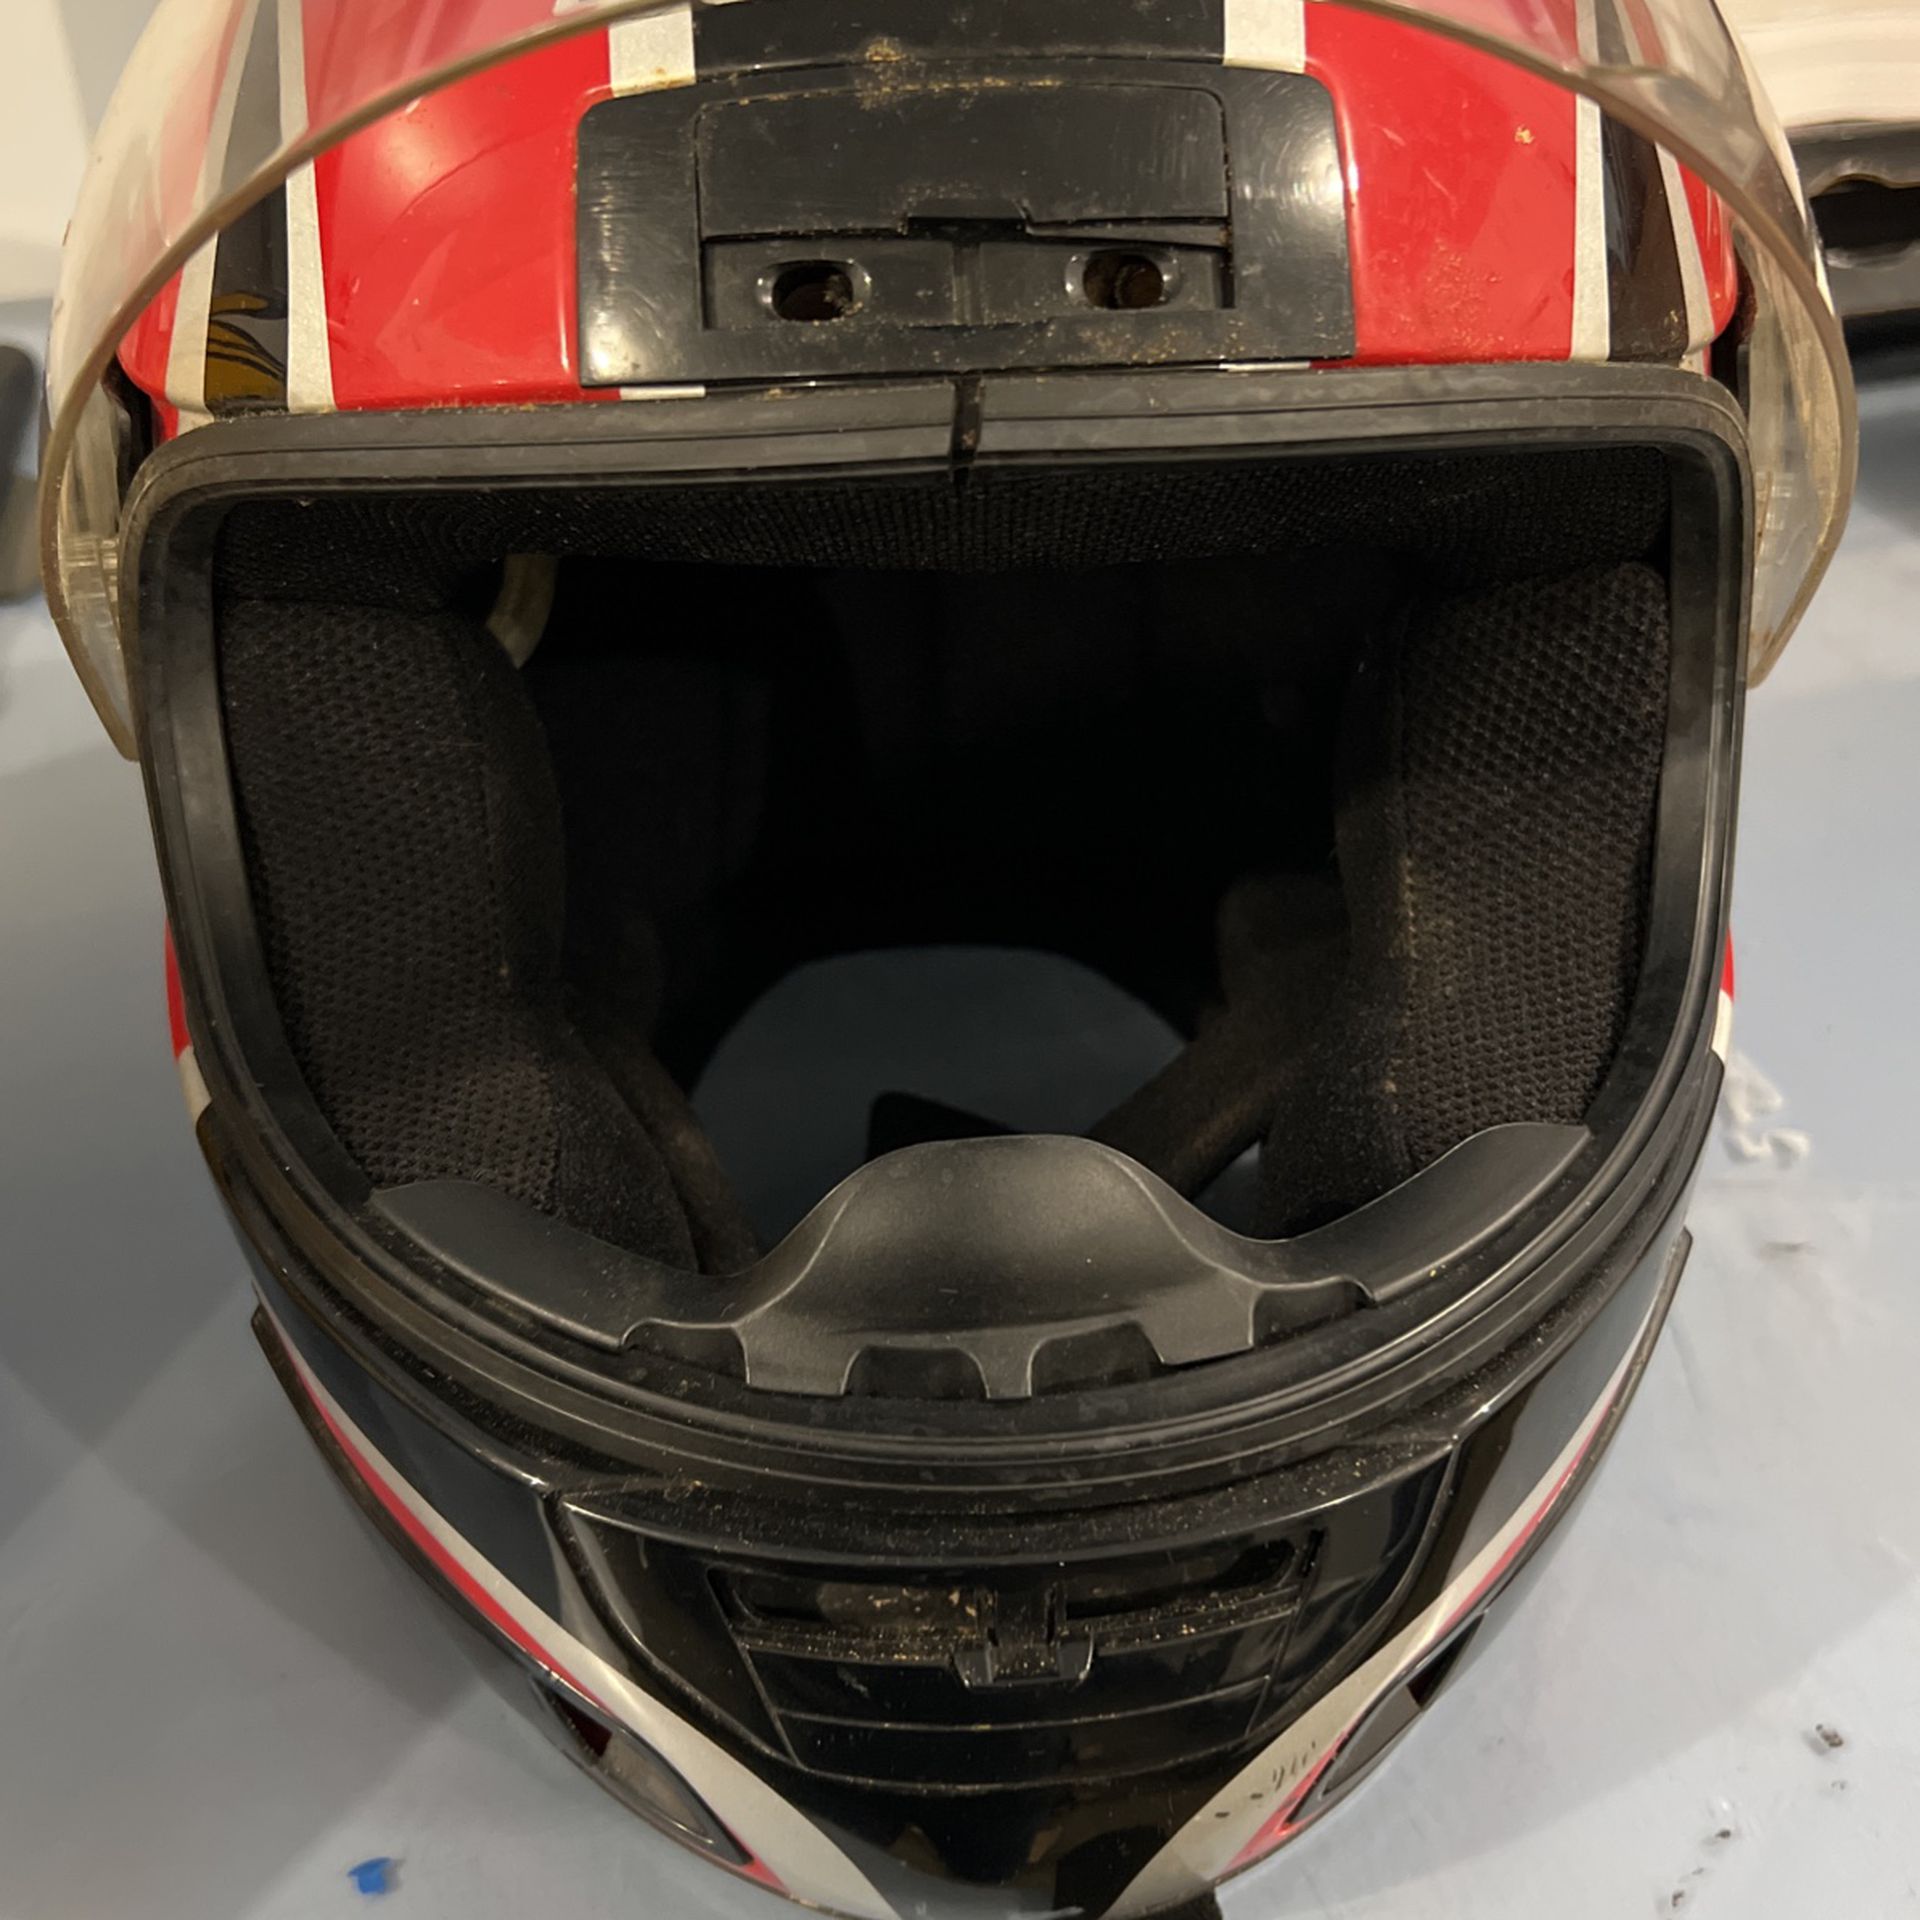 ATV AND MOTORCYCLE HELMETS